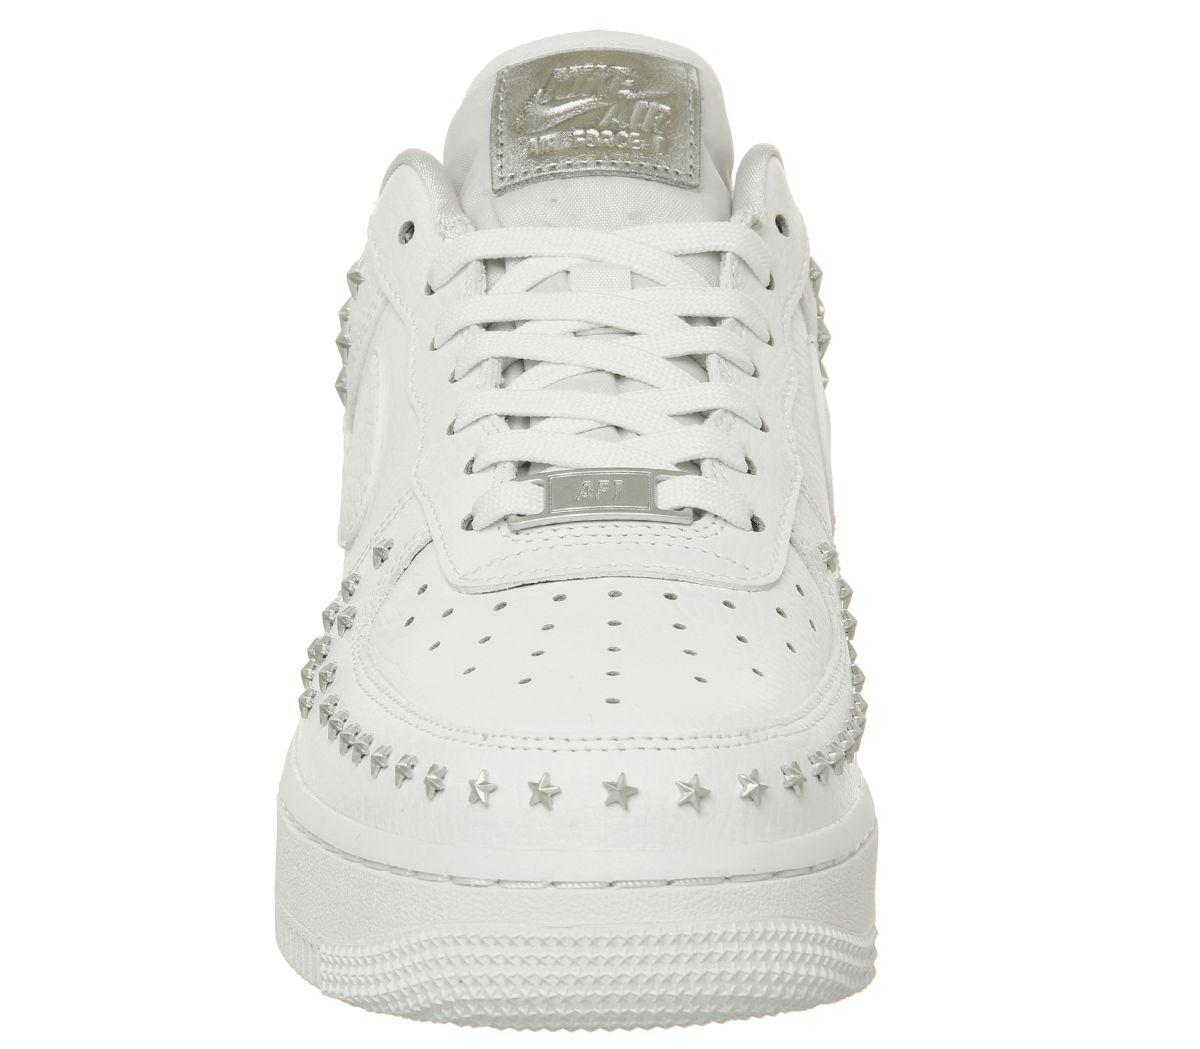 nike air force 1 07 trainers oil grey white star stud